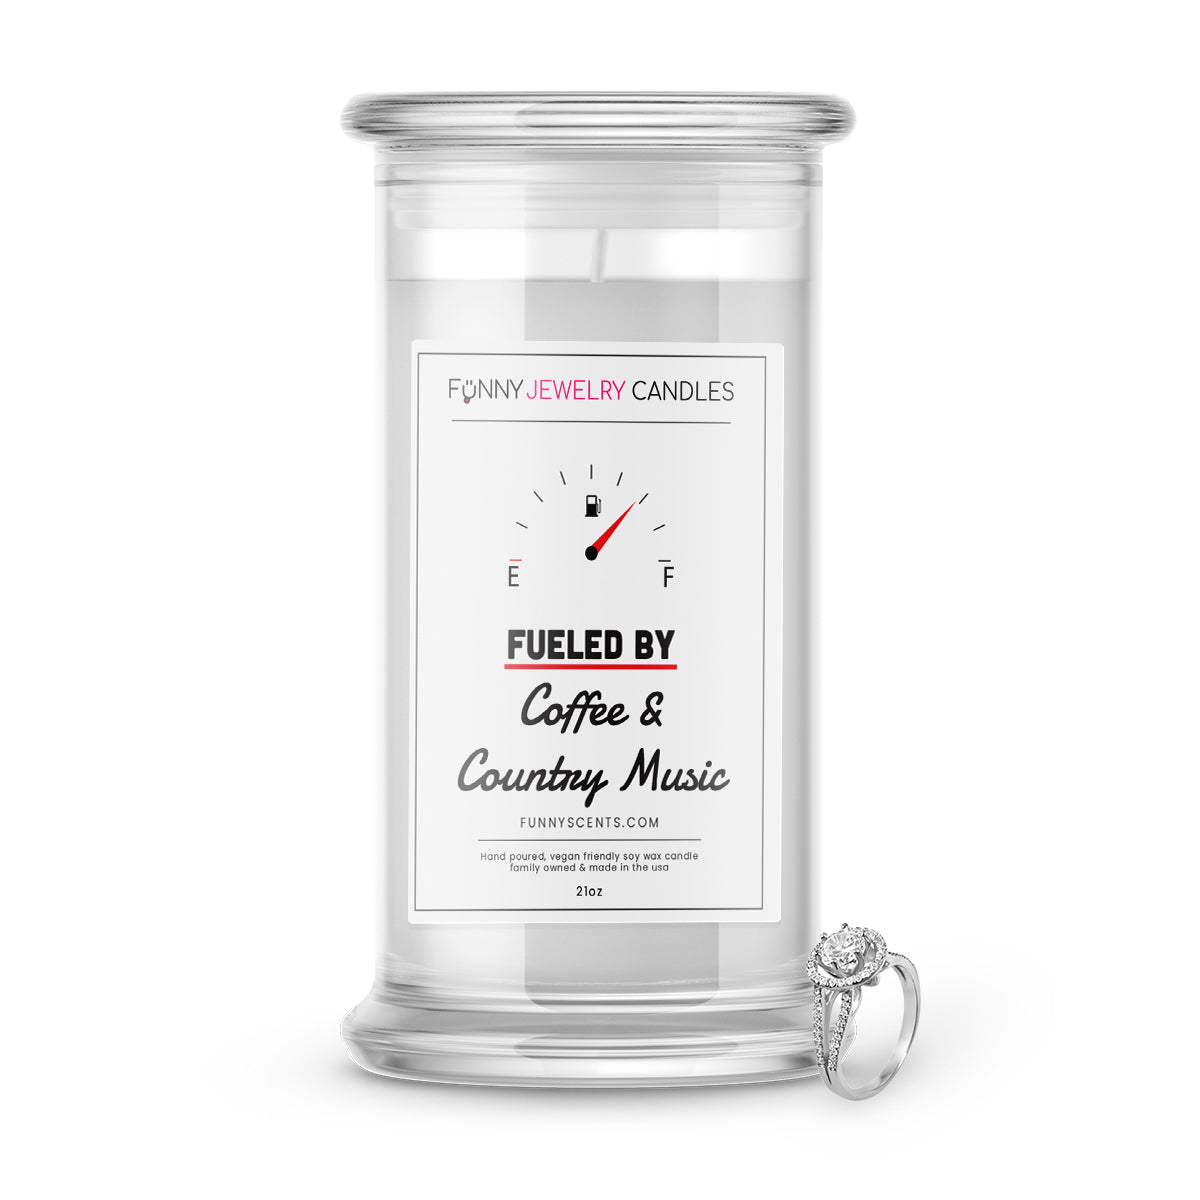 Fueled By Coffee and Country Music Jewelry Funny Candles